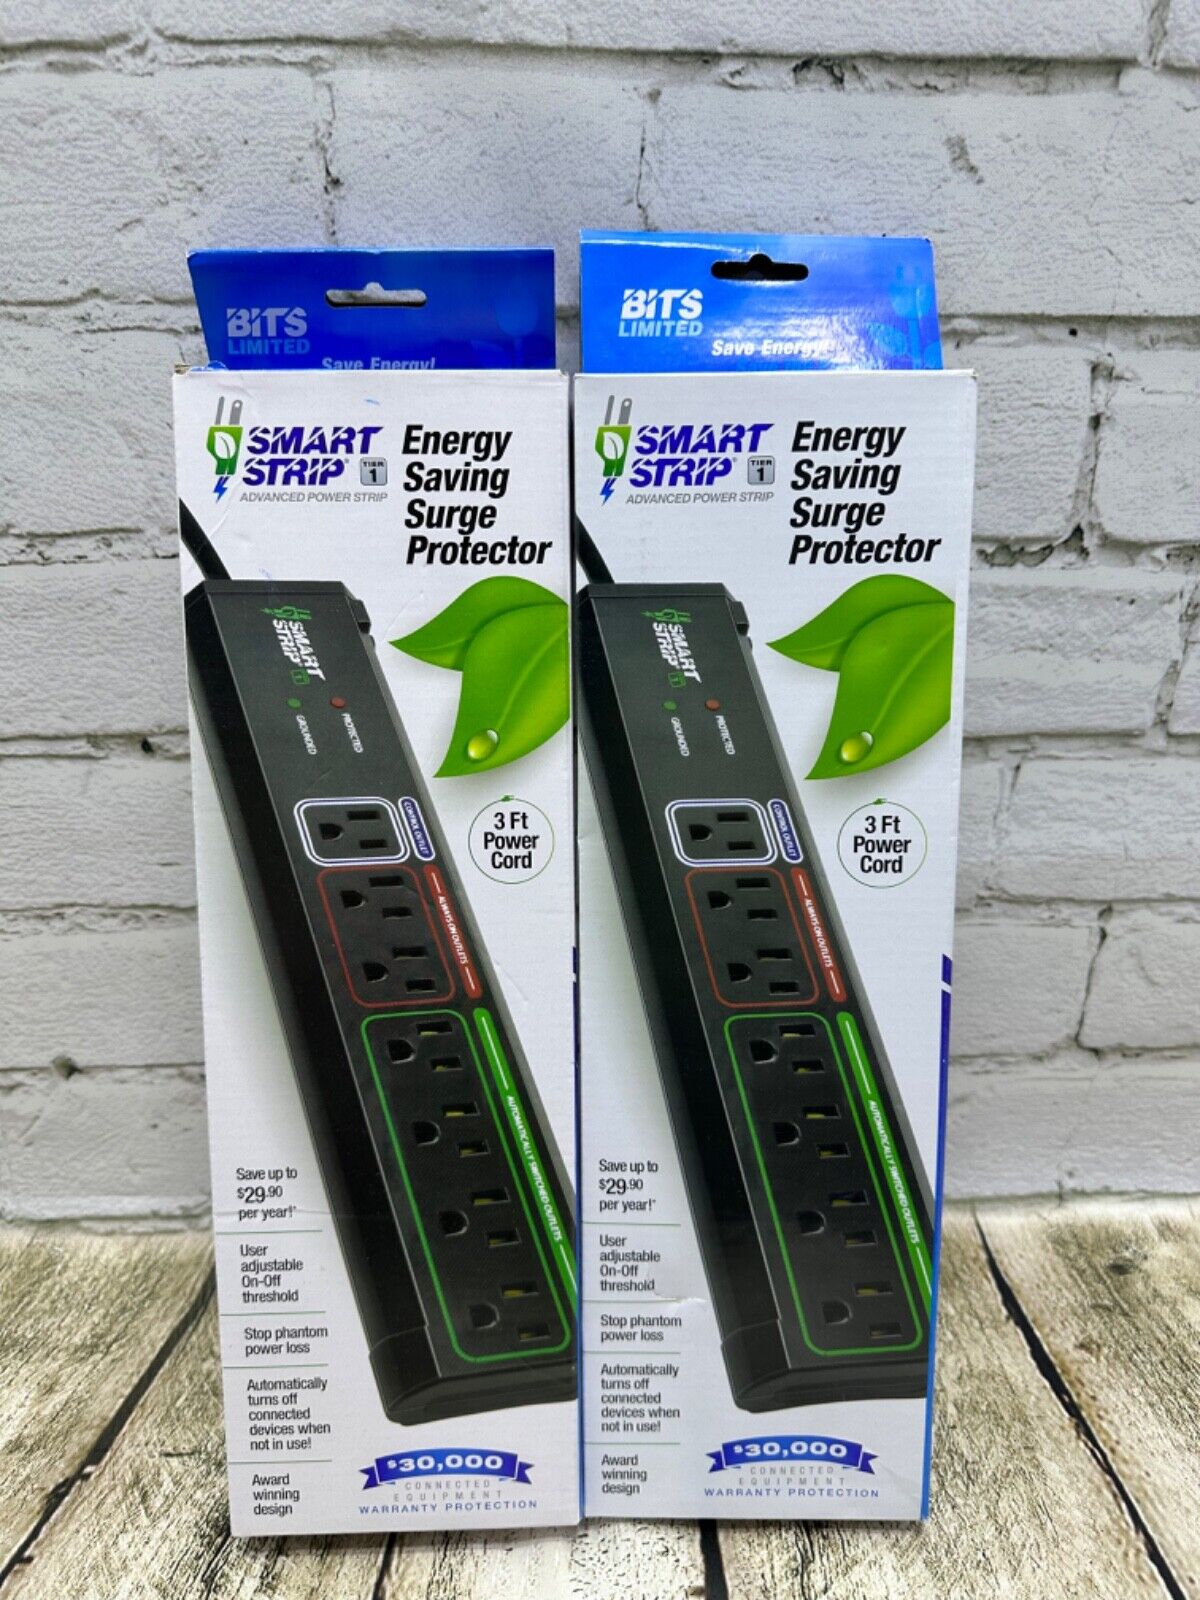 x2 Smart Strip ECG-7MVR Energy Saving Surge Protector w/Autoswitching Technology Bits Limited Does not apply